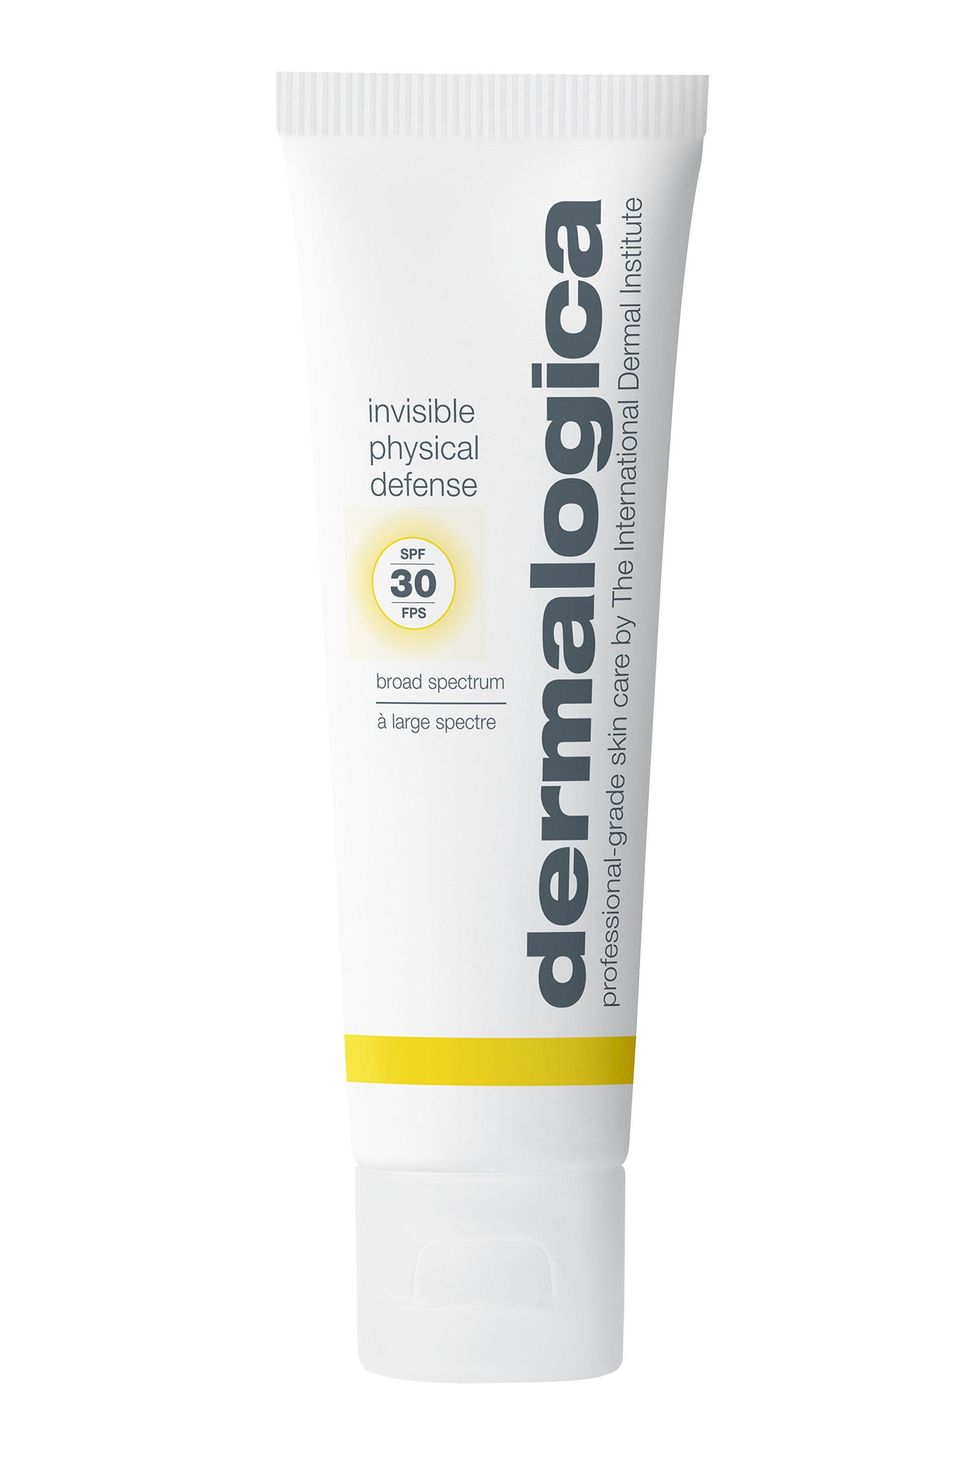 Dermalogica’s Invisible Physical SPF30